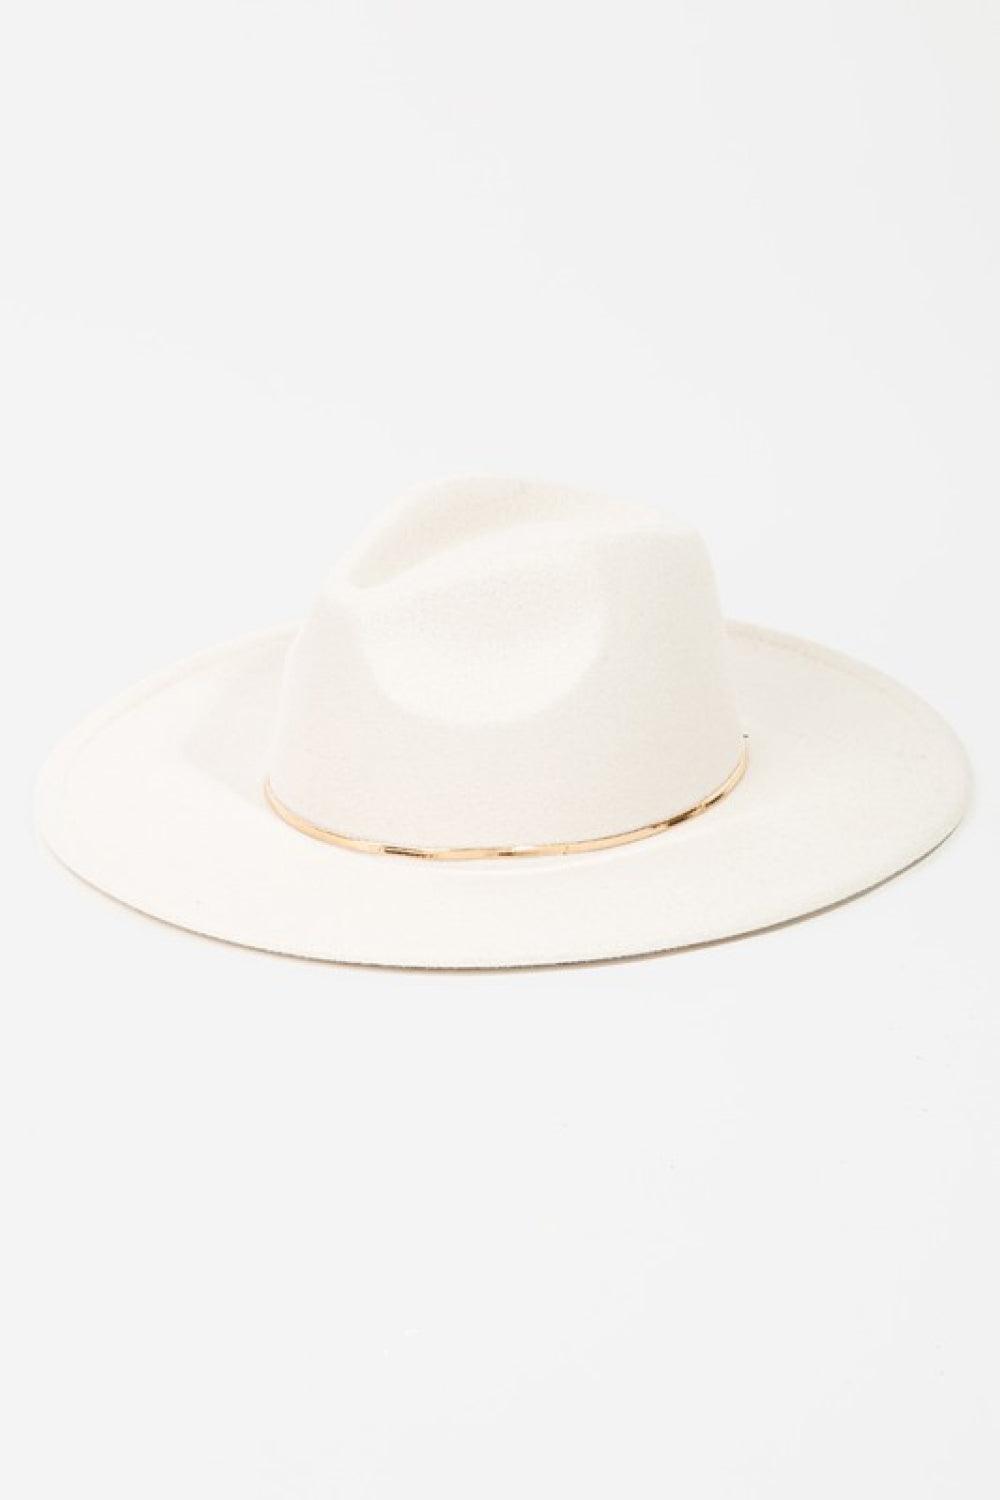 Slice of Chic | Herringbone Chain Fedora - Statement Piece NY Accessories, cute accessories, cute fashion accessories, Fame, final sale, Ship from USA, Statement Accessories Hats